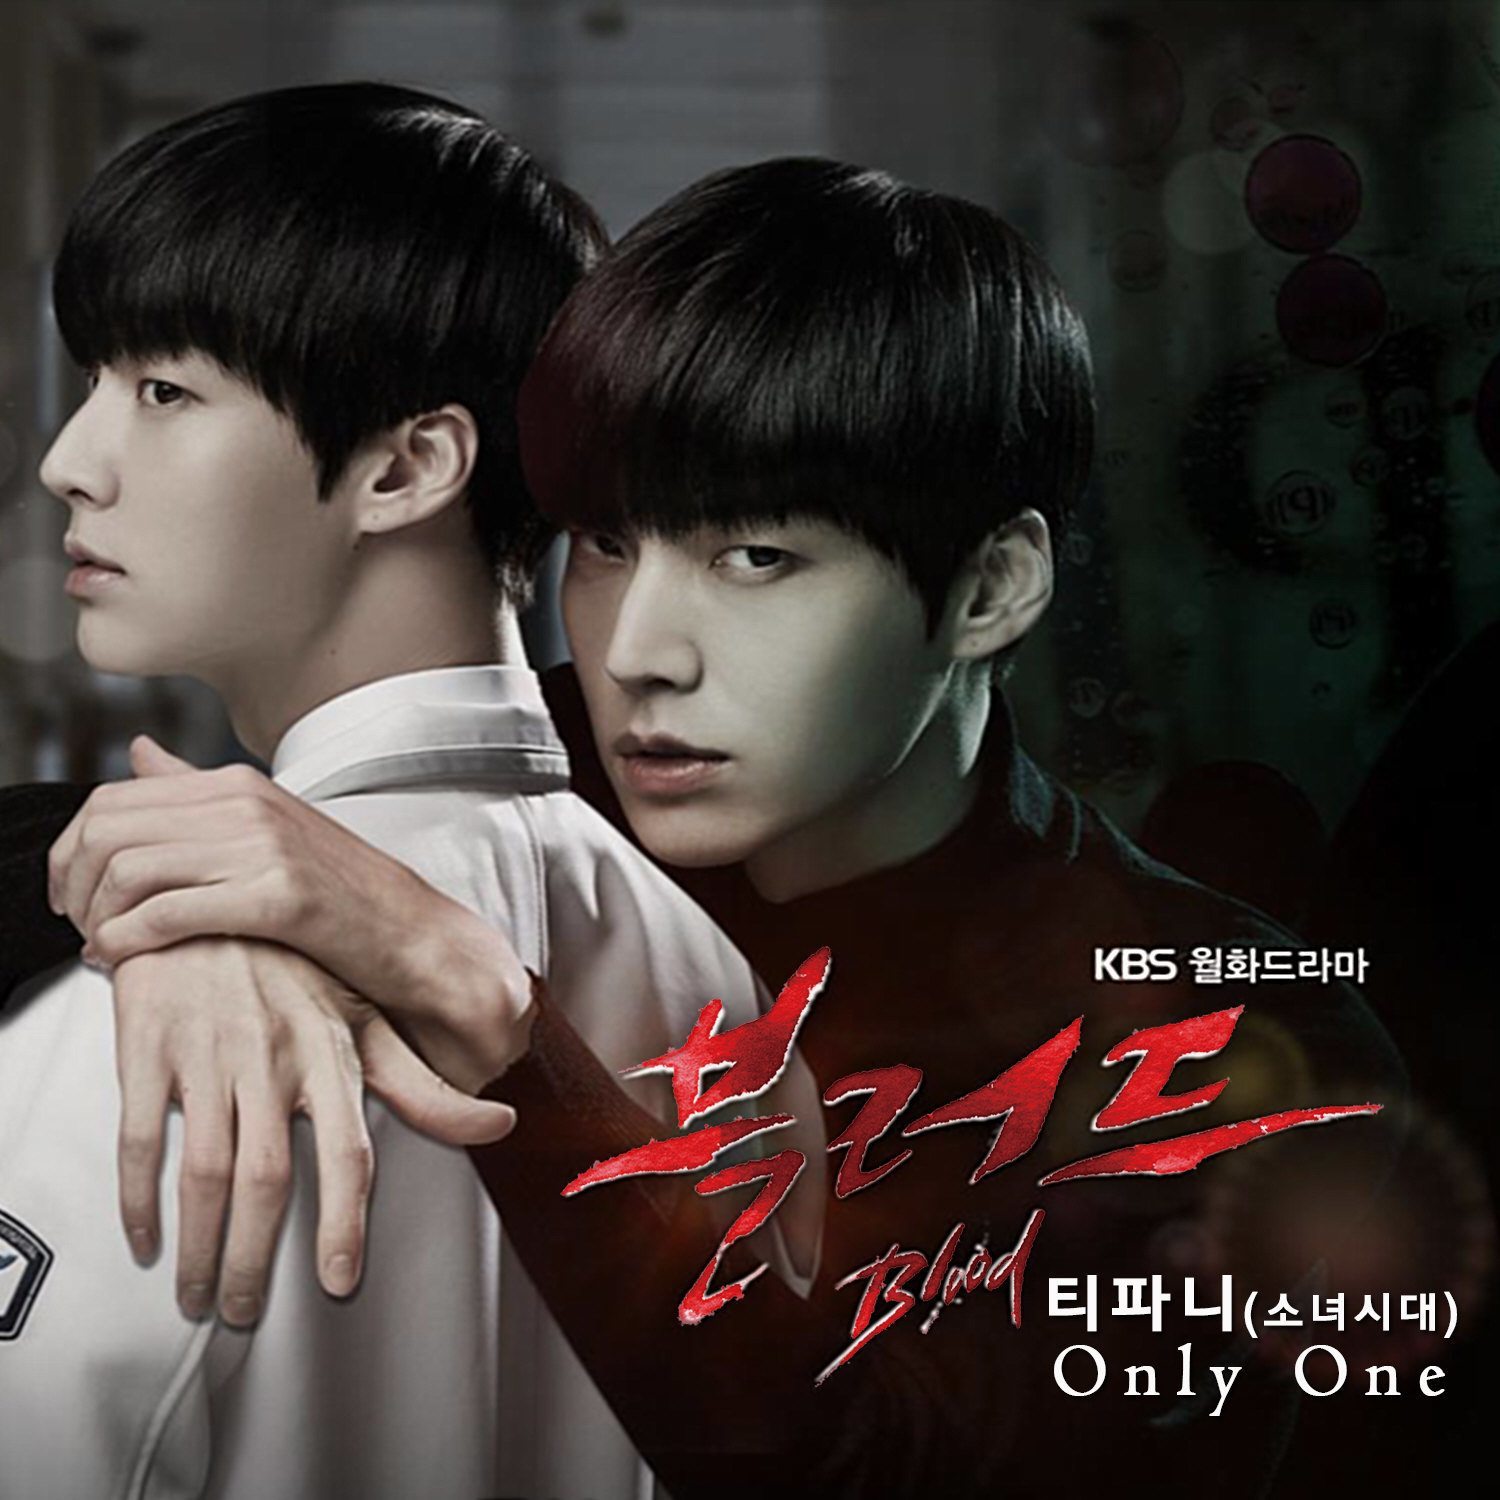 Girls' Generation Tiffany - Only One for KBS drama Blood OST Part 1